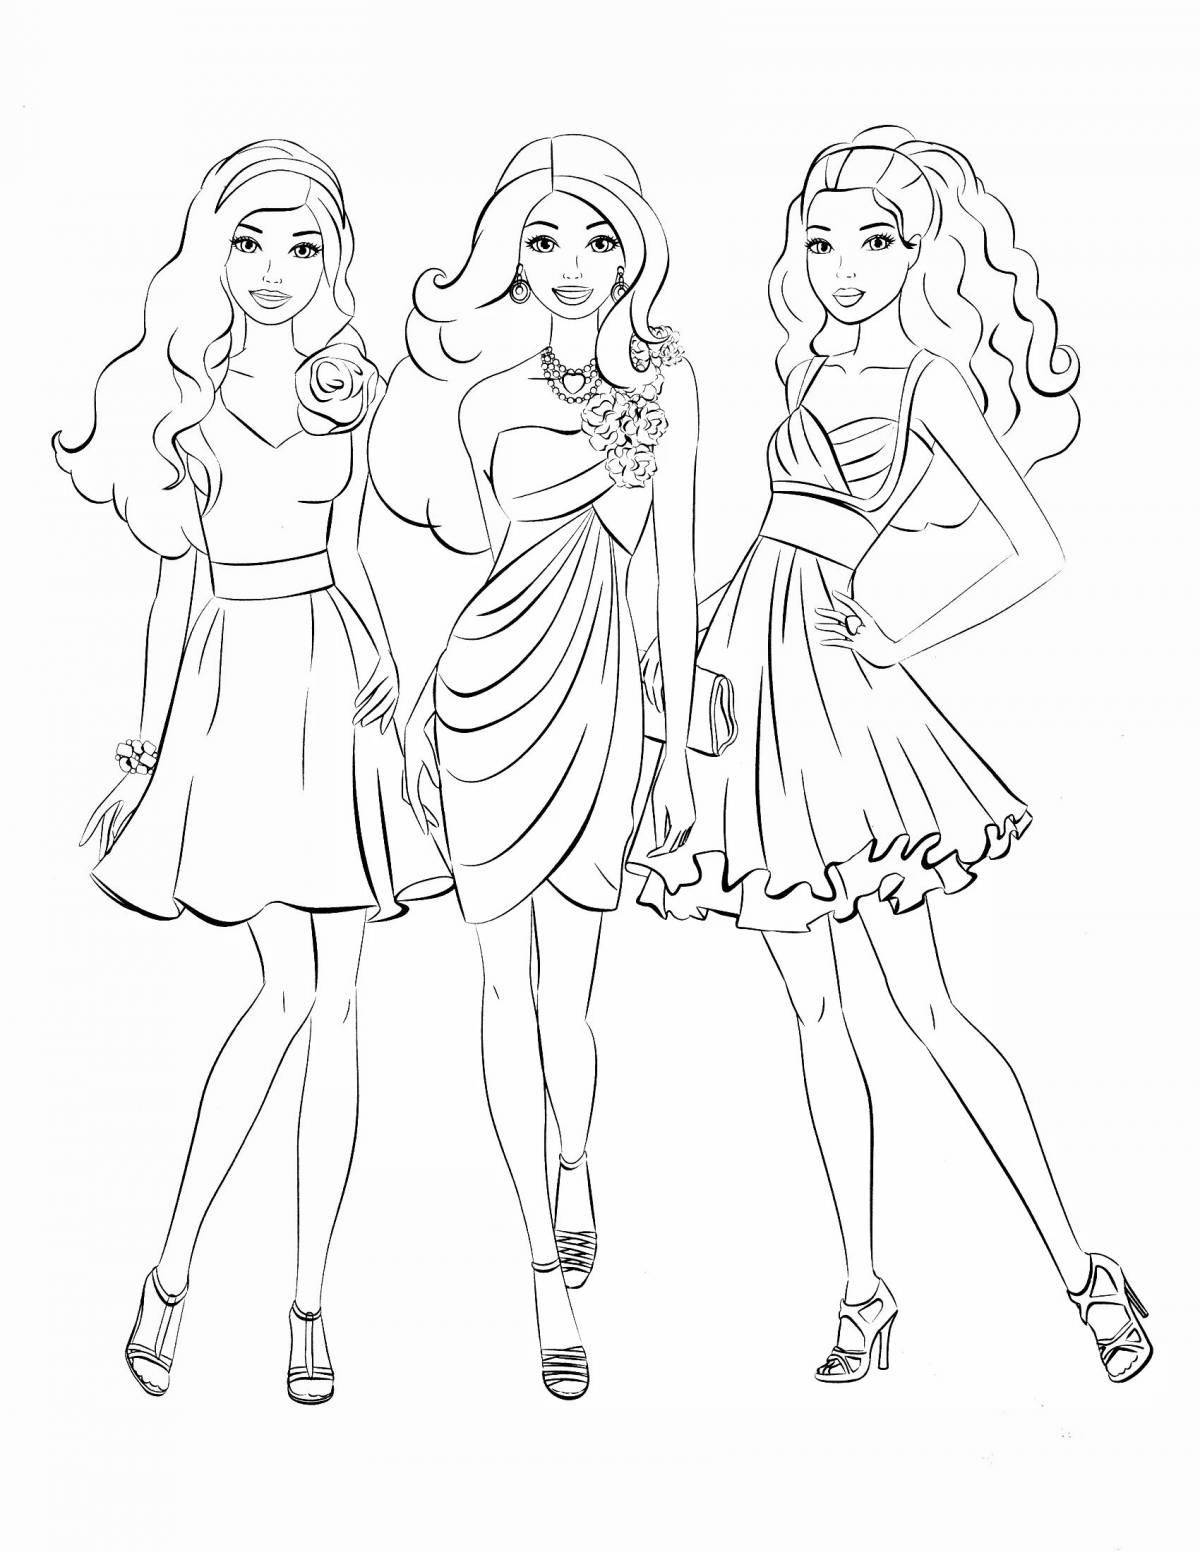 Colorful fashion coloring page for girls